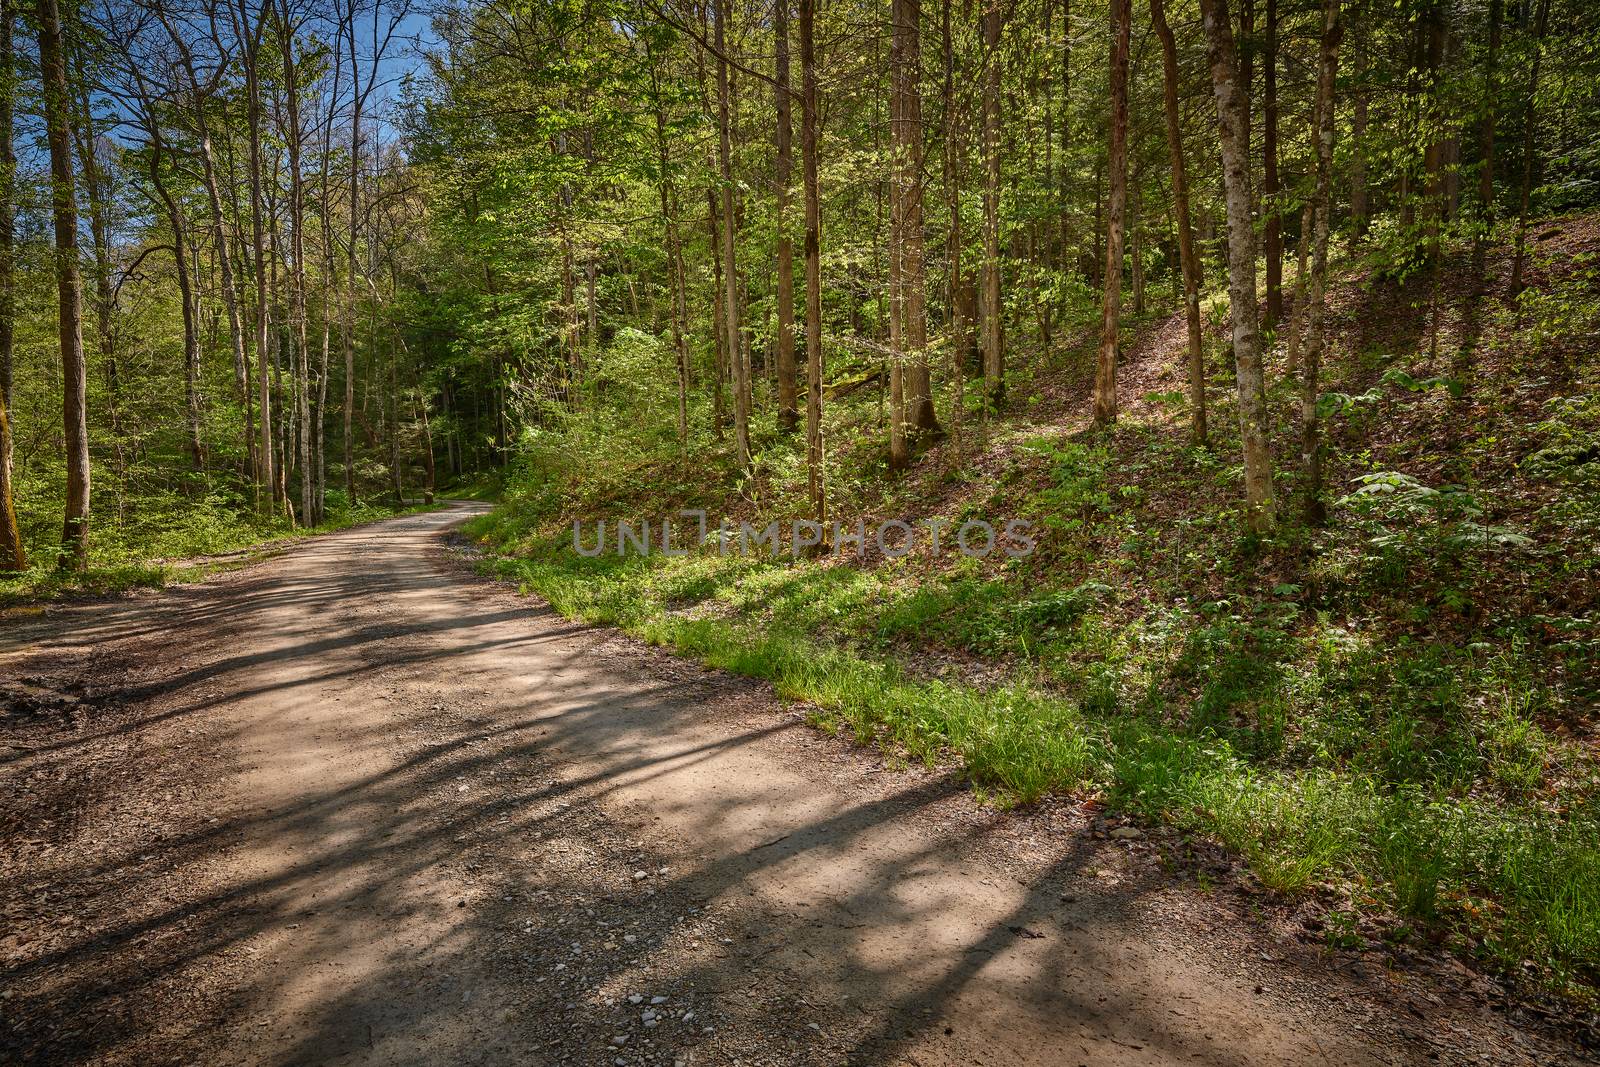 Gravel road though a forest. by patrickstock